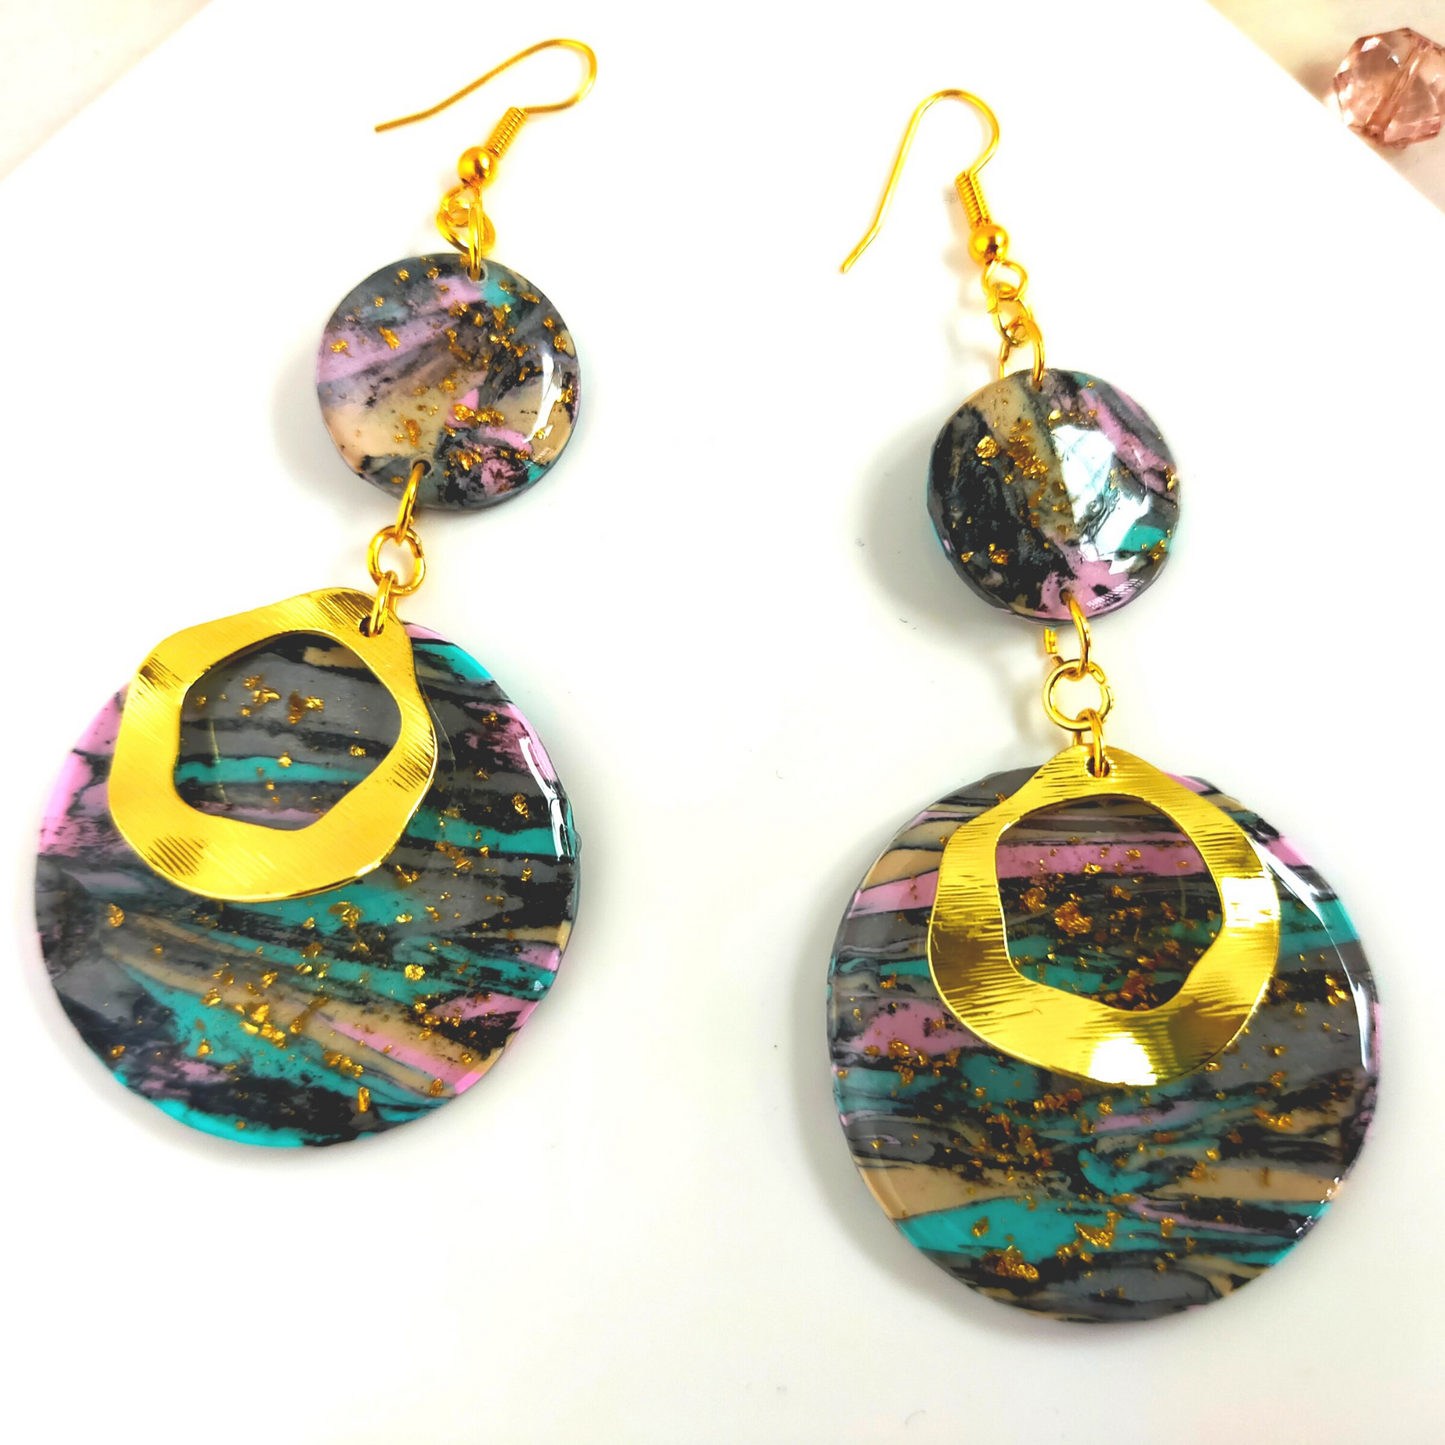 "Harper" polymer clay earrings with circle charm